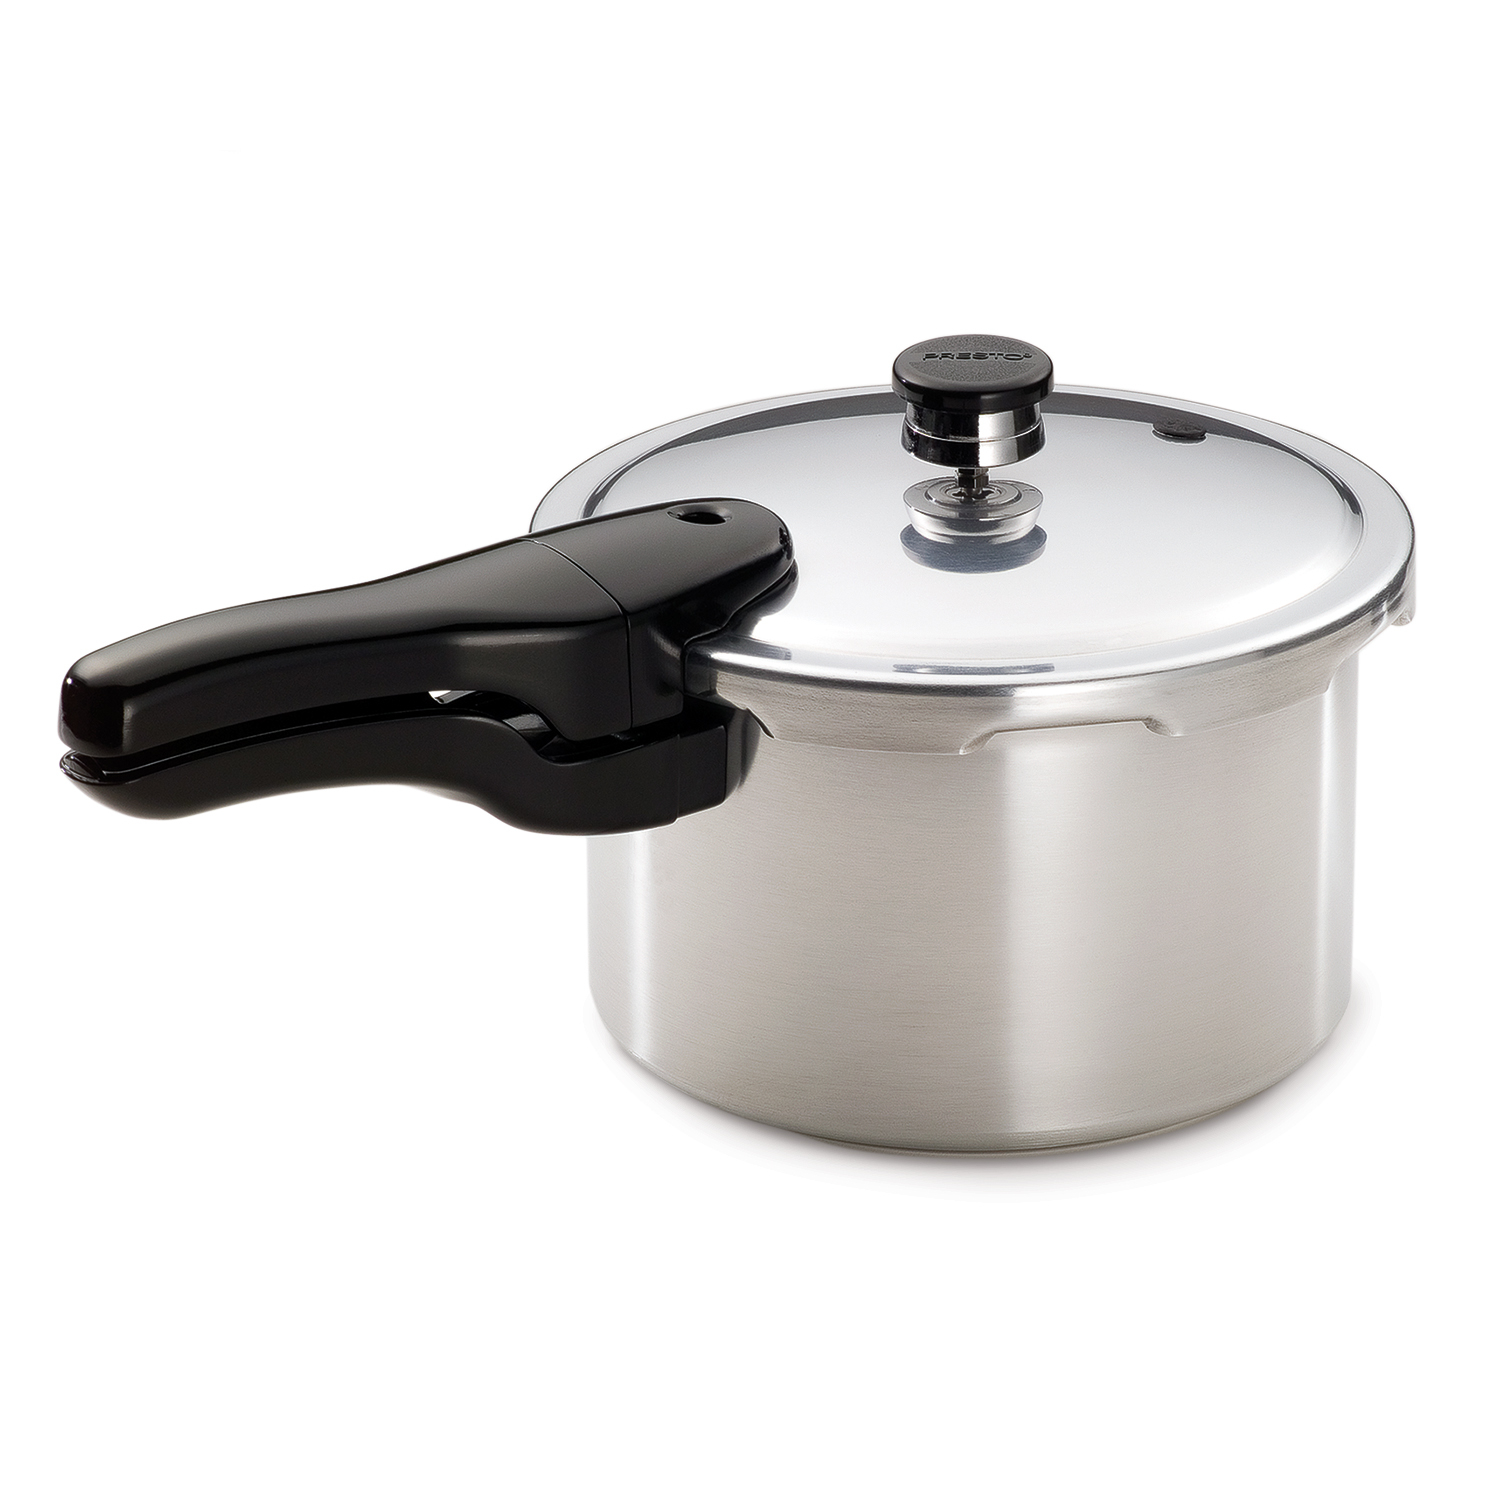 Photos - Other Accessories Presto Polished Aluminum Pressure Cooker 4 01241 